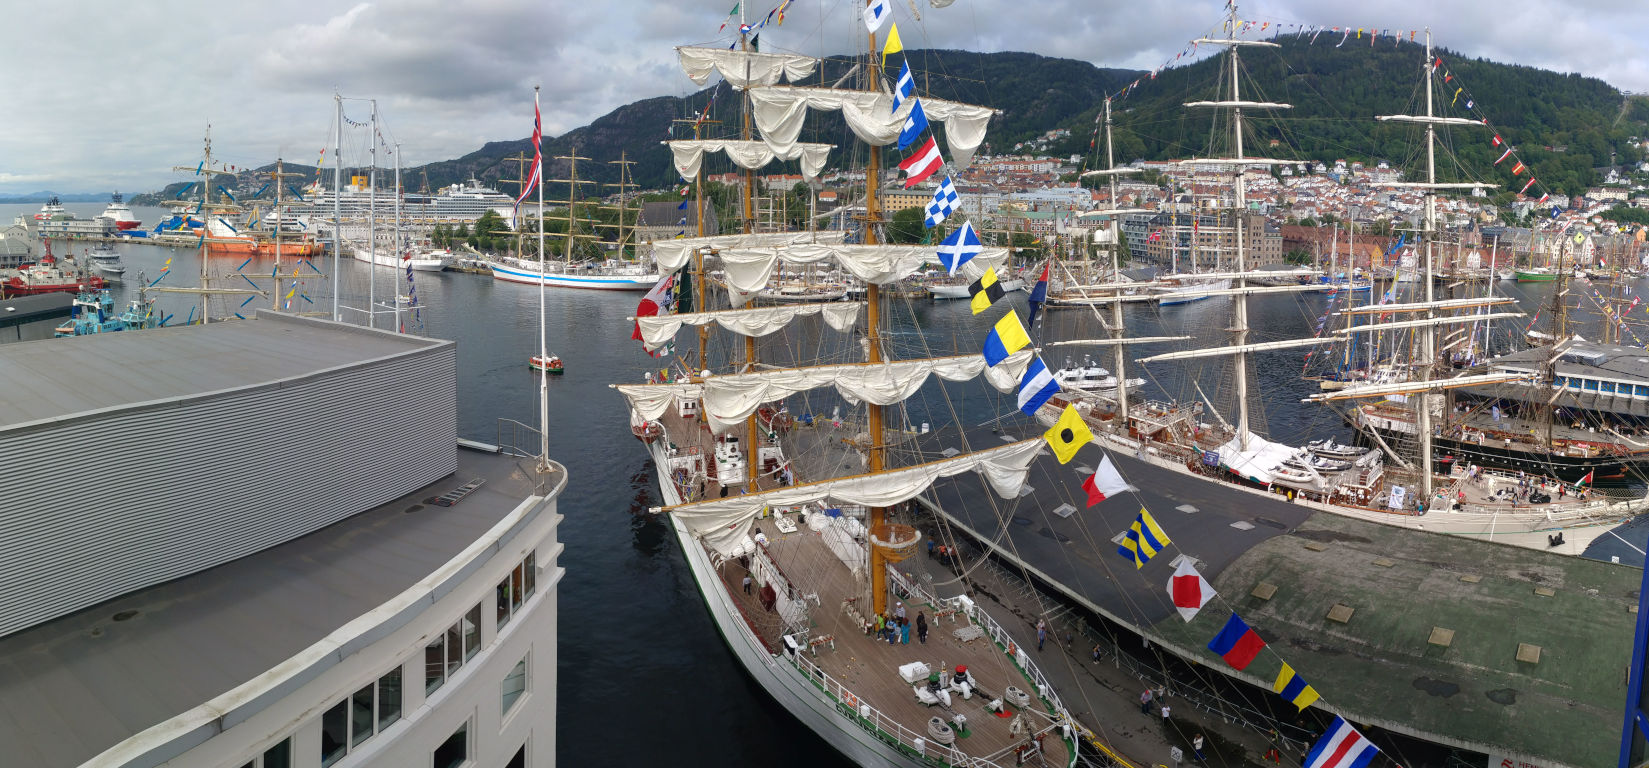 The Tall Ships Races 2019